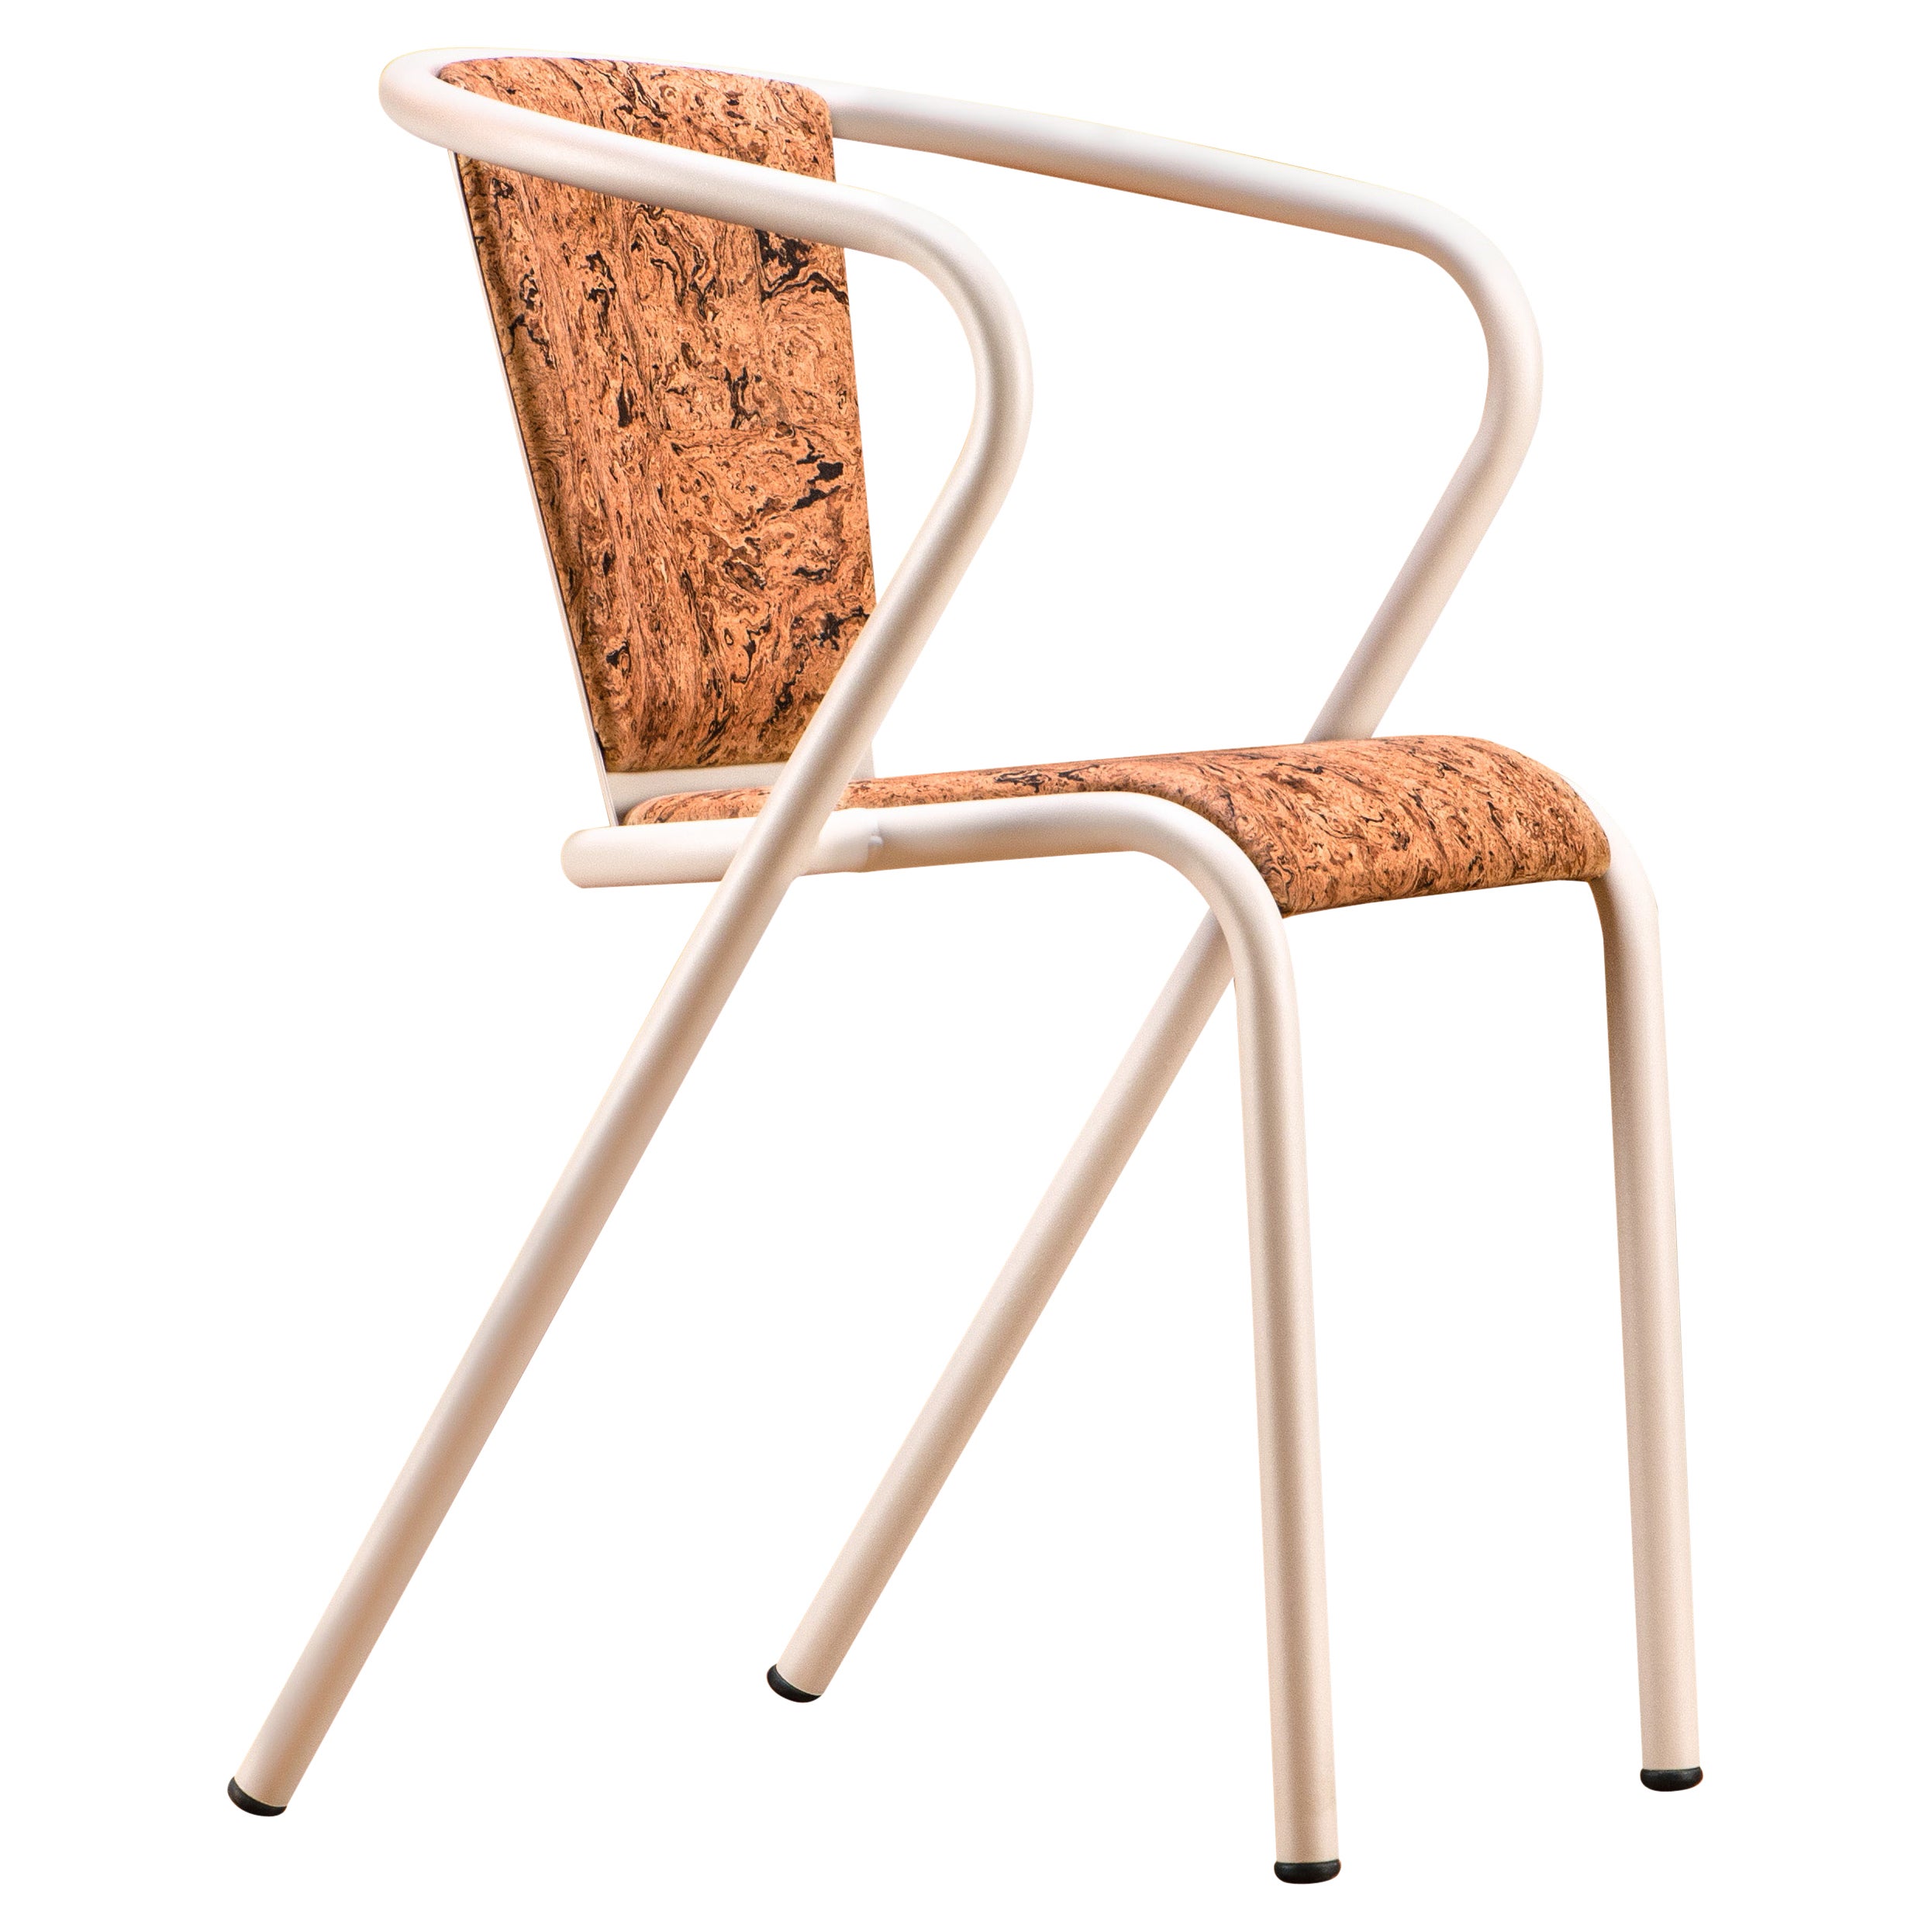 BICAchair Modern Steel Armchair Champagne, Upholstery in Natural Cork